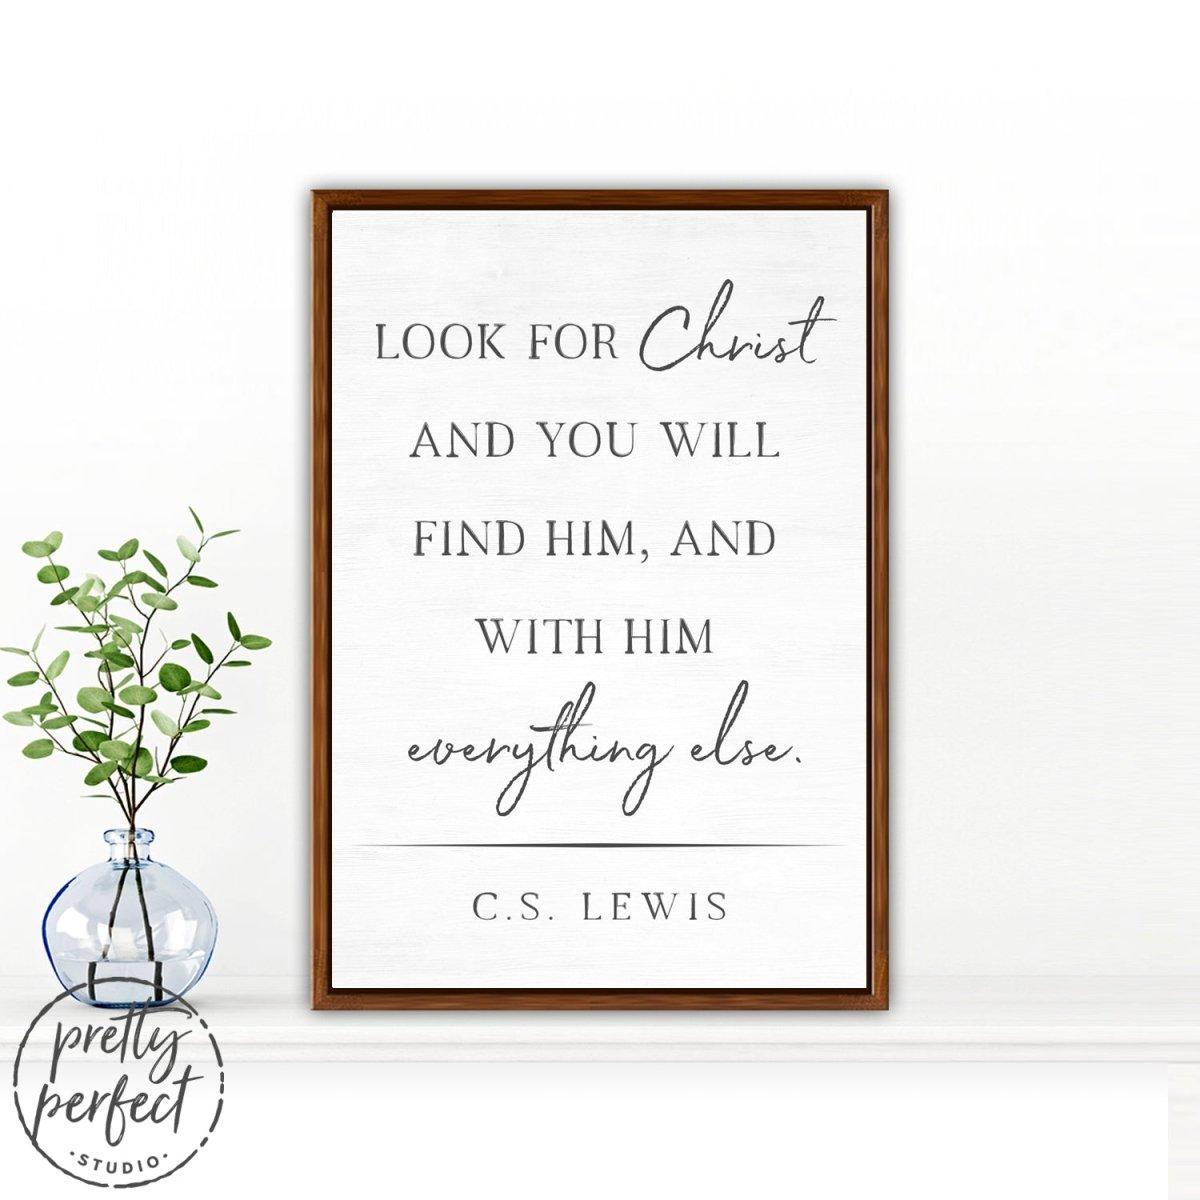 Look For Christ CS Lewis Sign on Shelf - Pretty Perfect Studio